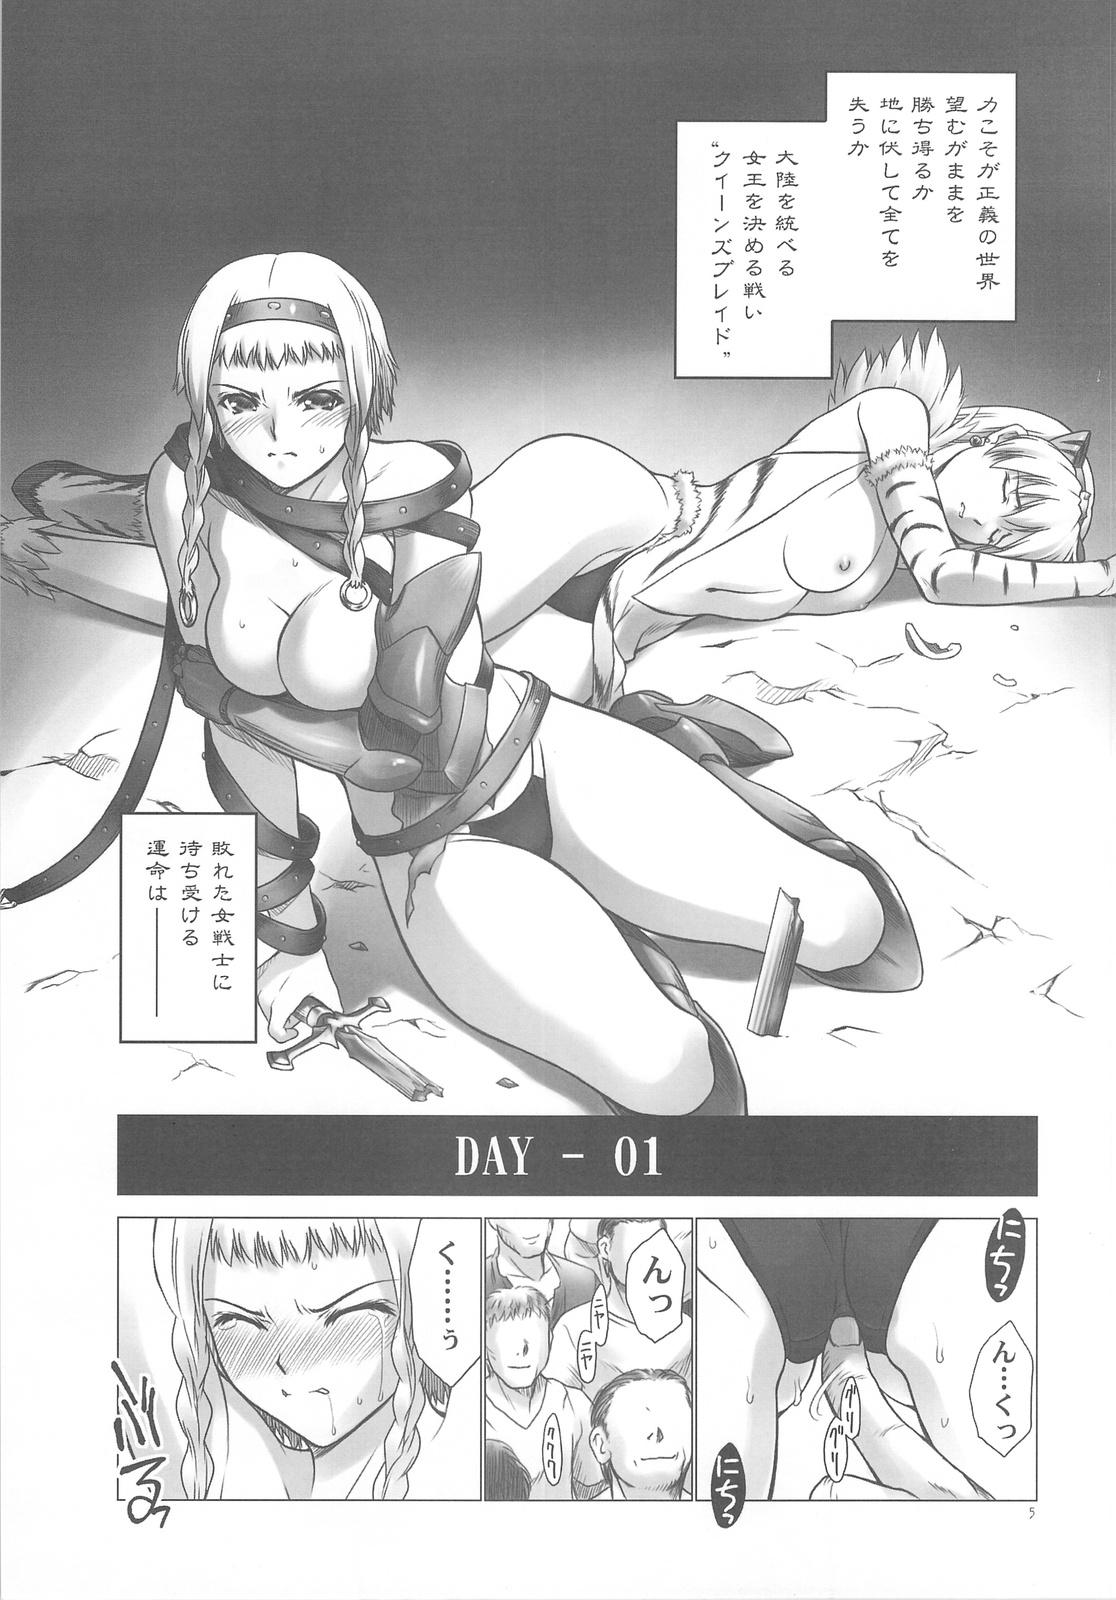 Exgirlfriend QB - Queens blade Pussy To Mouth - Page 4